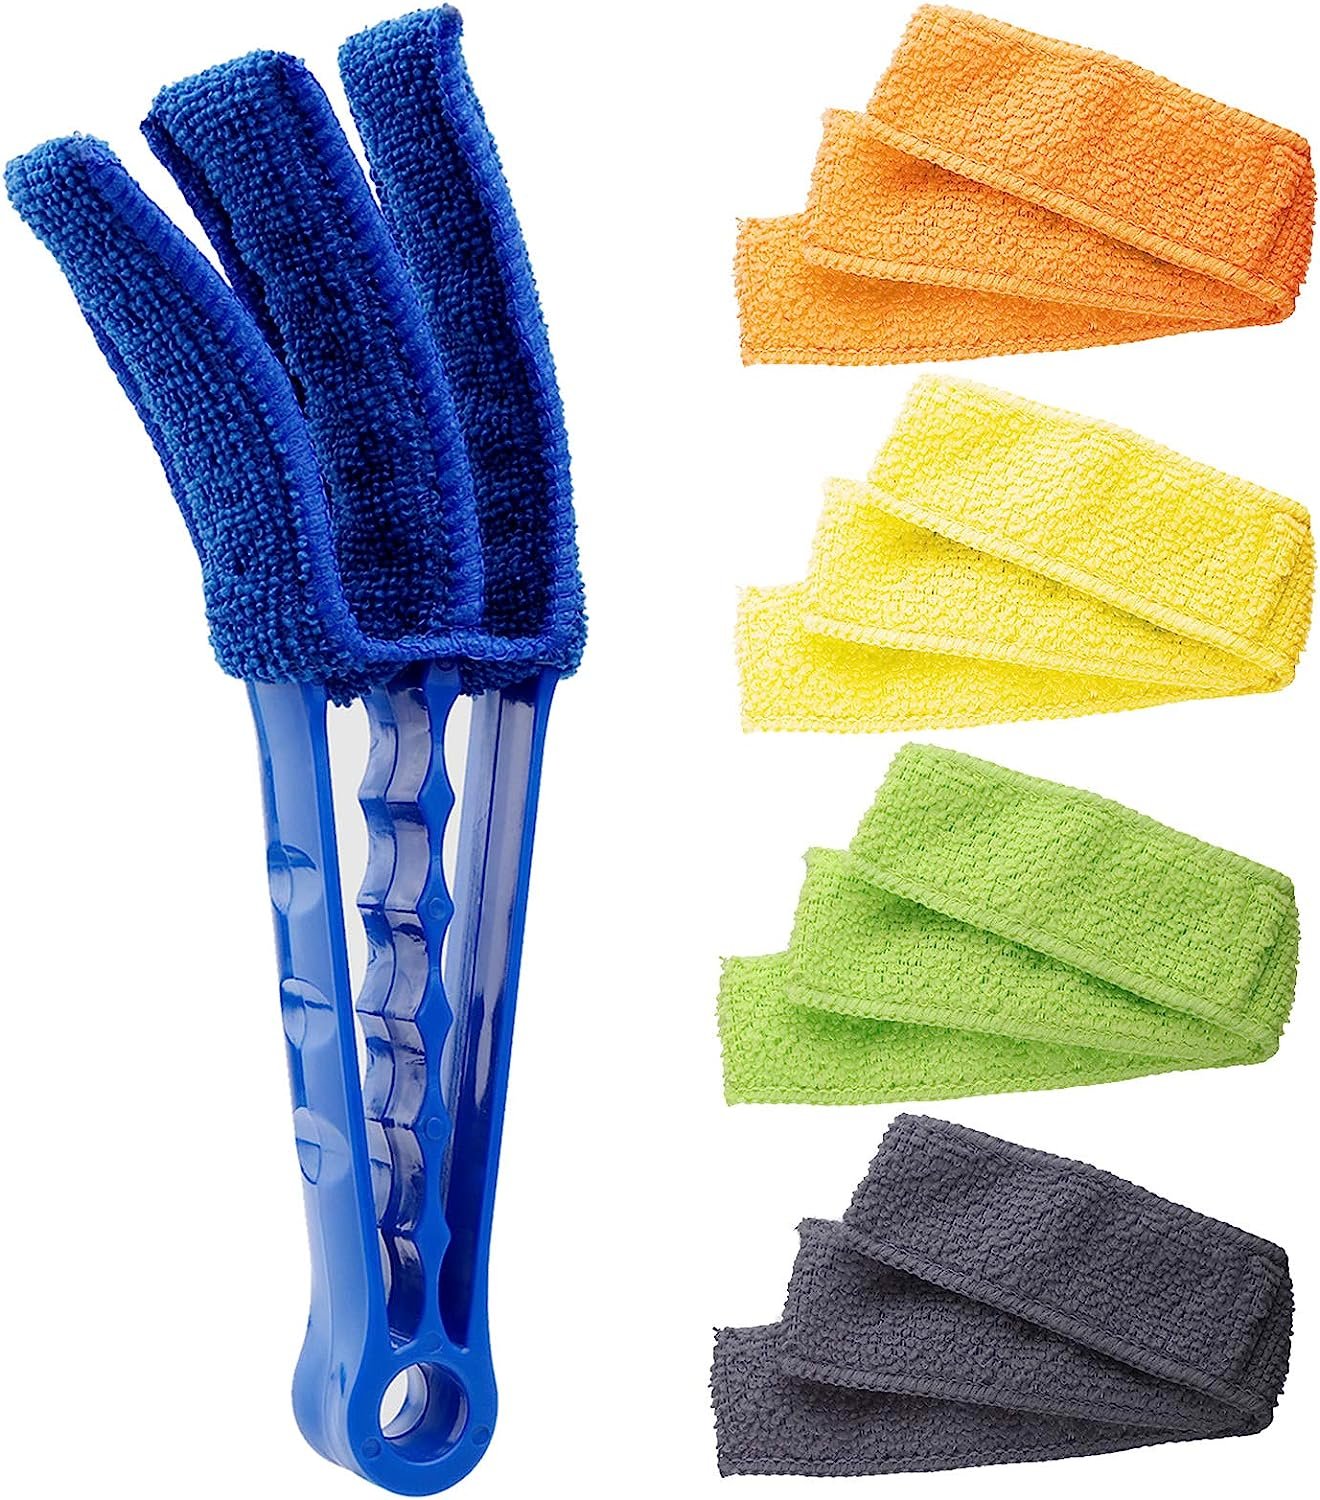 Window Blind Cleaner Duster Brush with 5 Microfiber Sleeves - Blind Cleaner Tools for Window Shutters Blind Air Conditioner